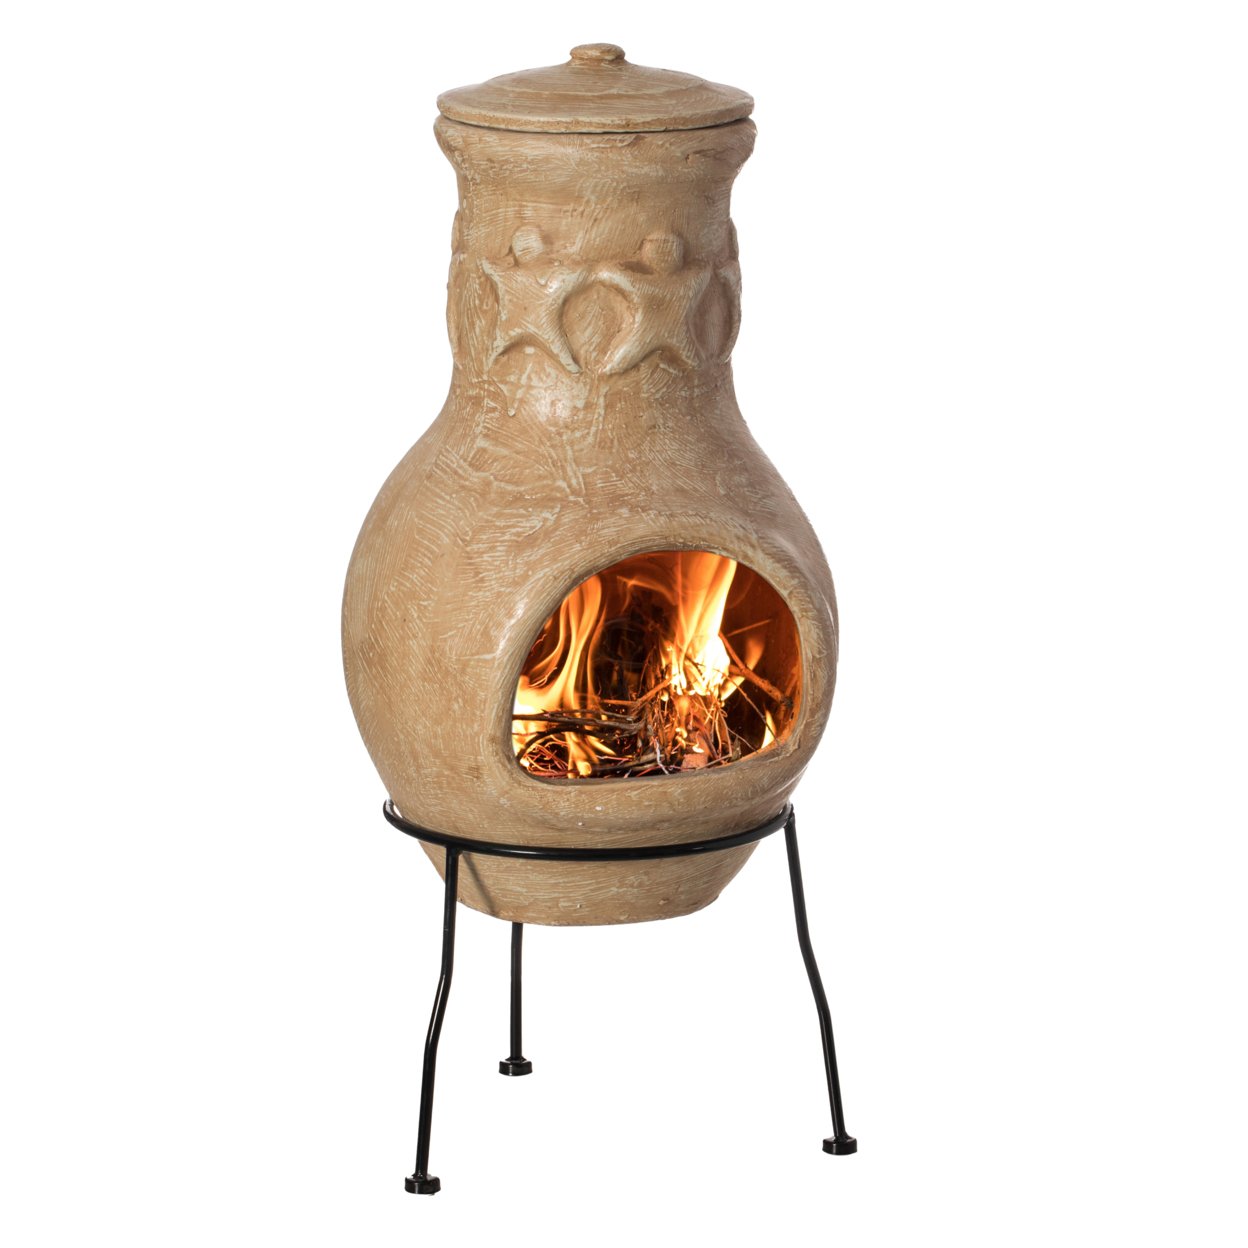 Beige Outdoor Clay Chiminea Outdoor Fireplace Maya Design Charcoal Burning Fire Pit With Sturdy Metal Stand, Barbecue, Cocktail Party,